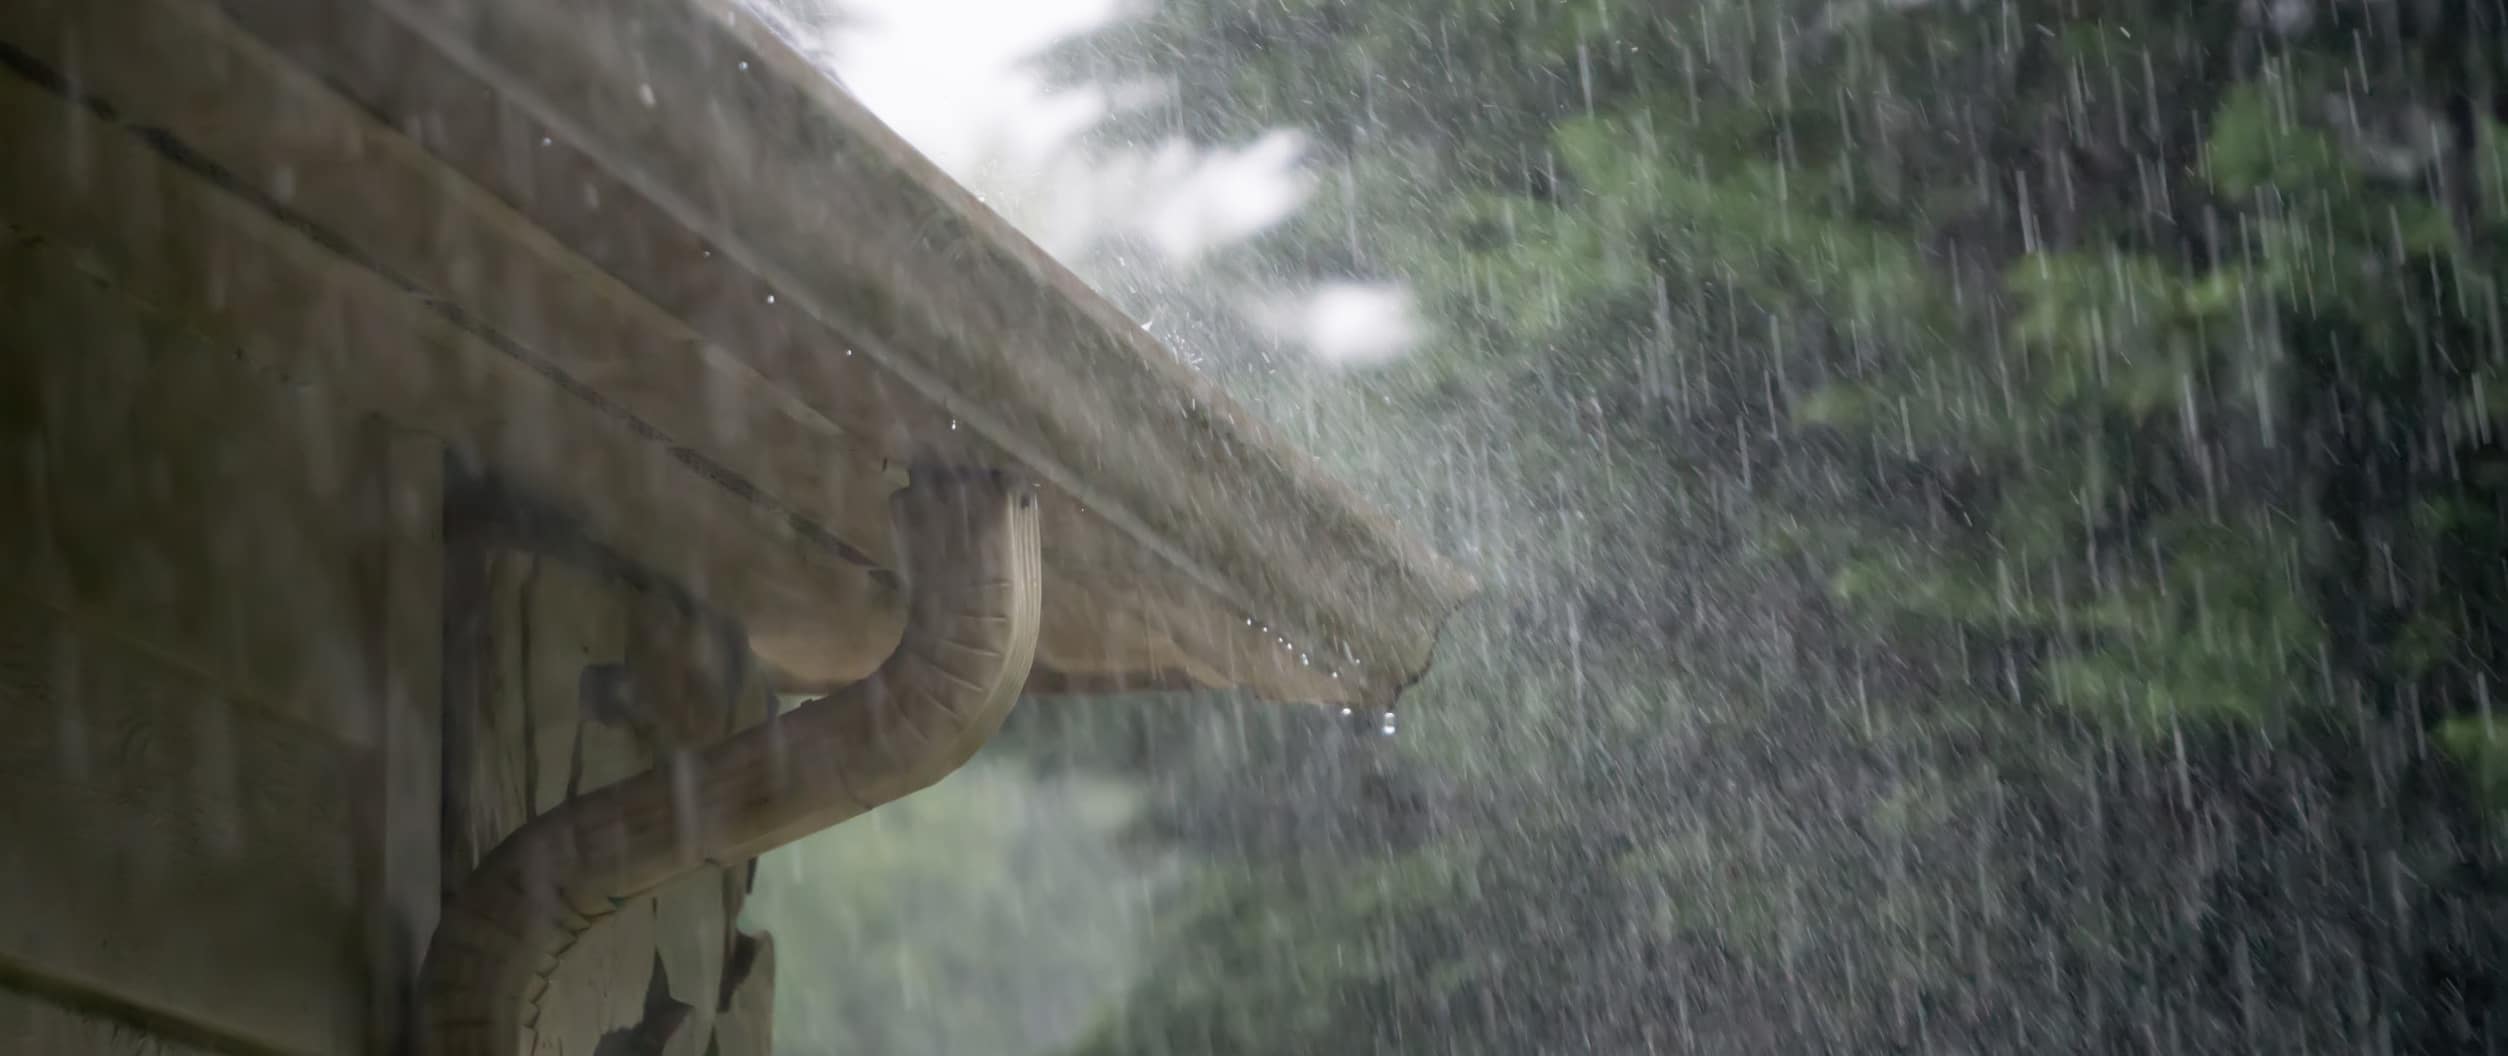 Rain pouring onto a home roof and gutter